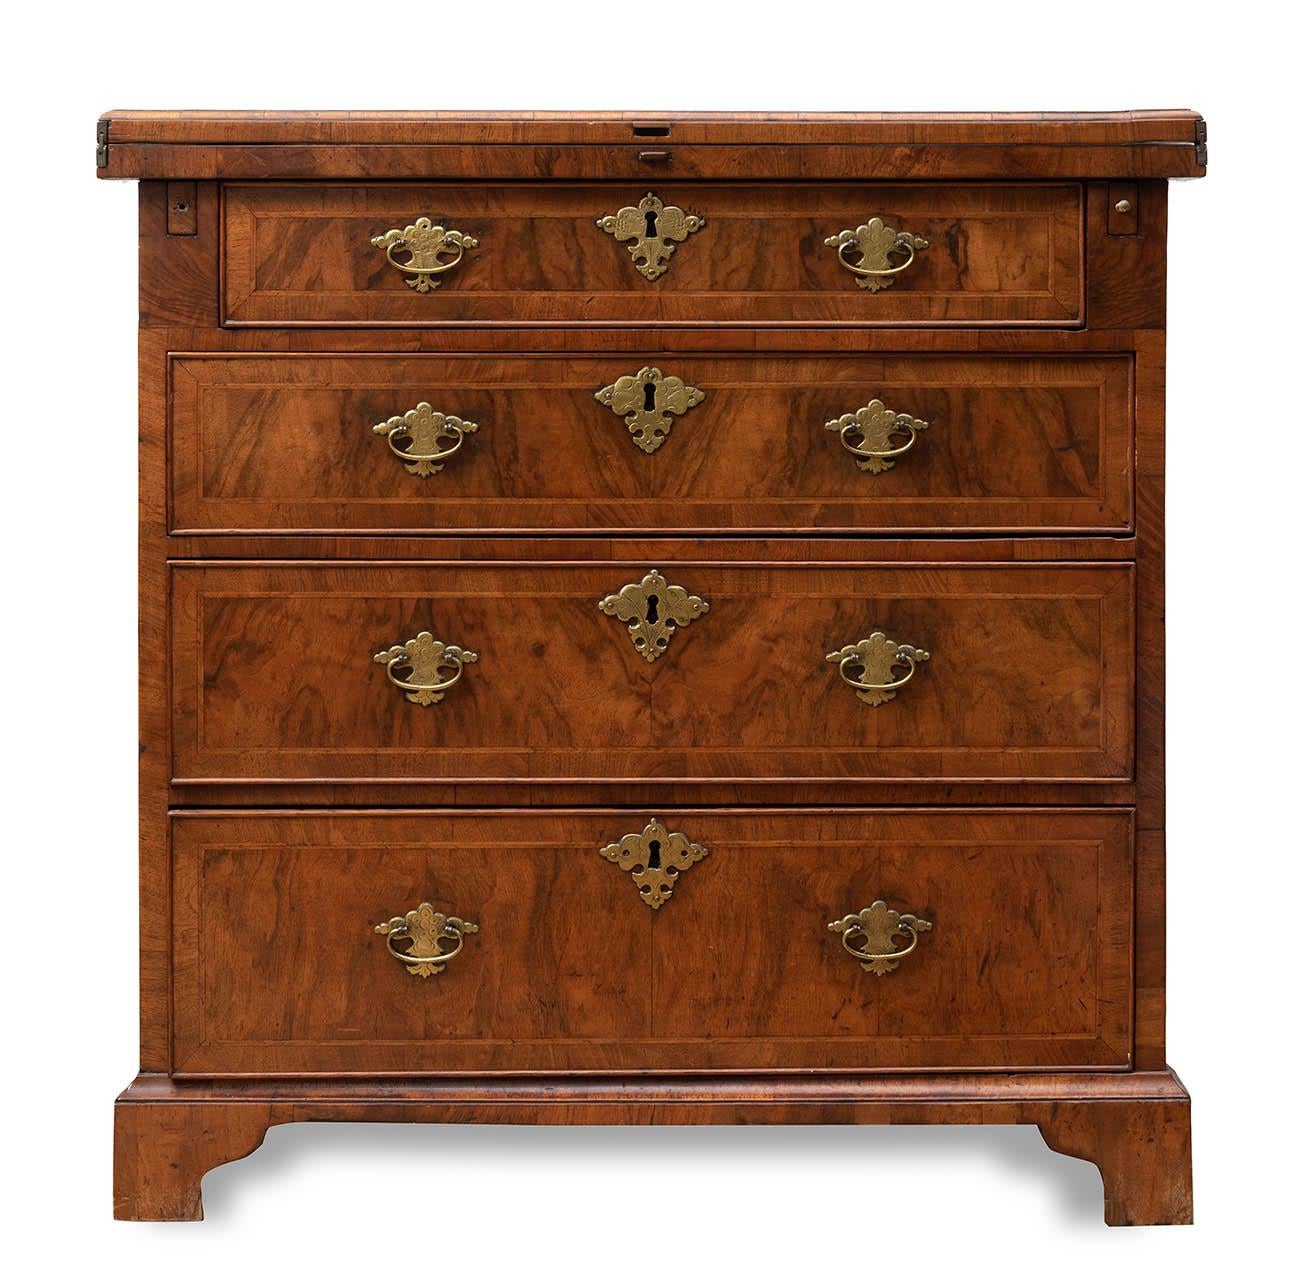 English George II 4-drawer walnut bureau desk with root-wood walnut burr marquetry and original bronze handles and fittings, circa 1730s. It stands on period 